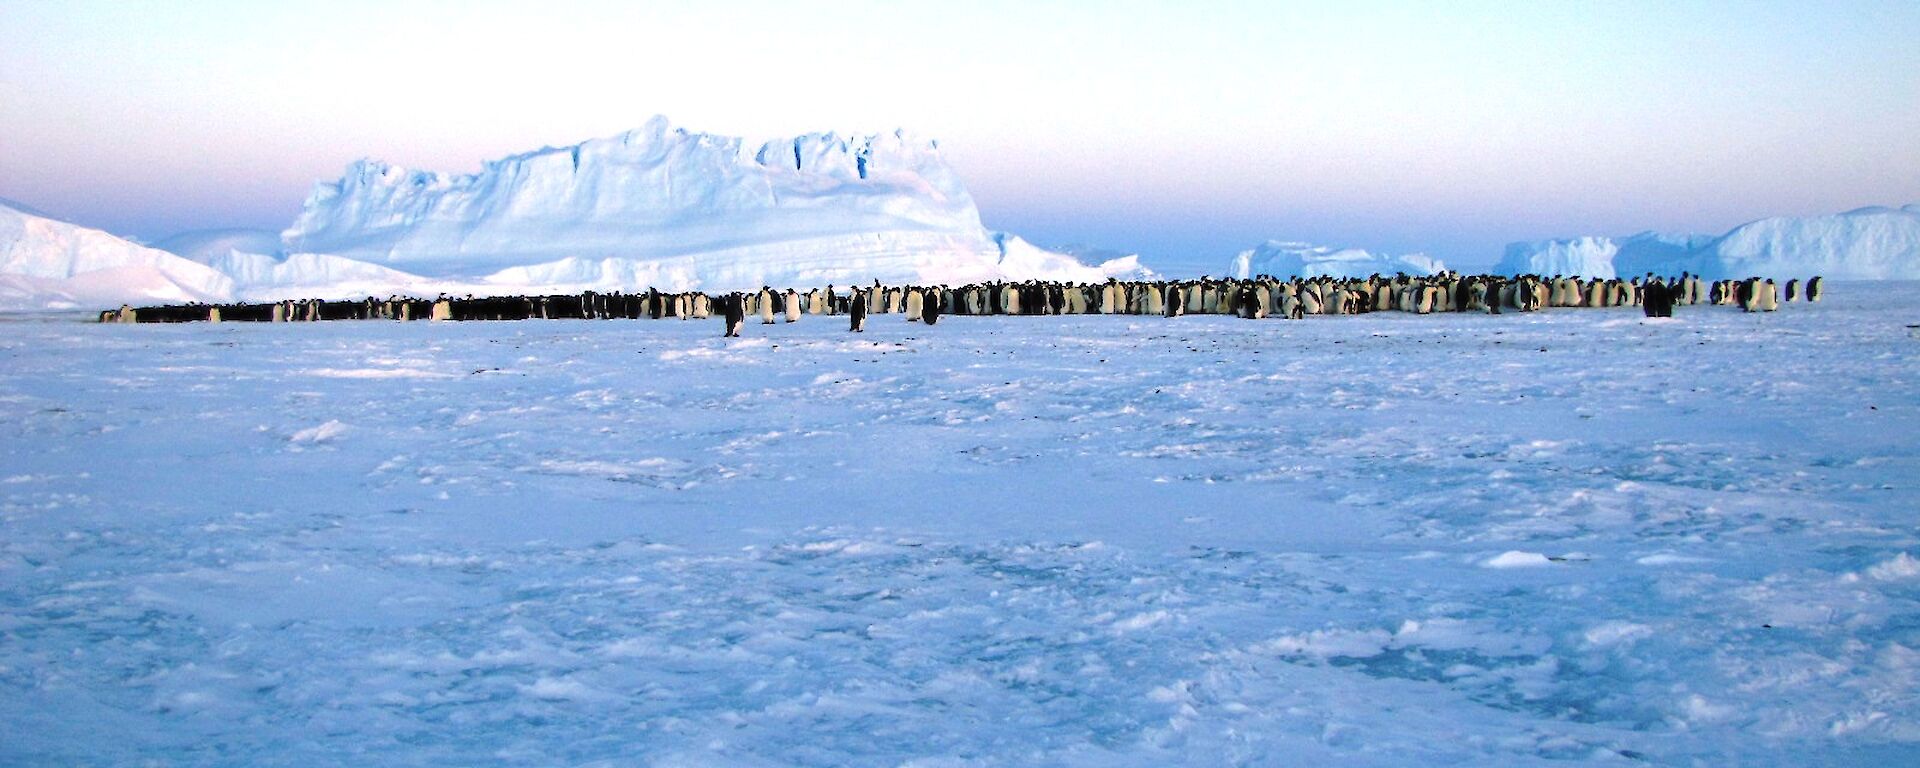 A large penguin colony at Auster taken from a distance with a large iceberg in background